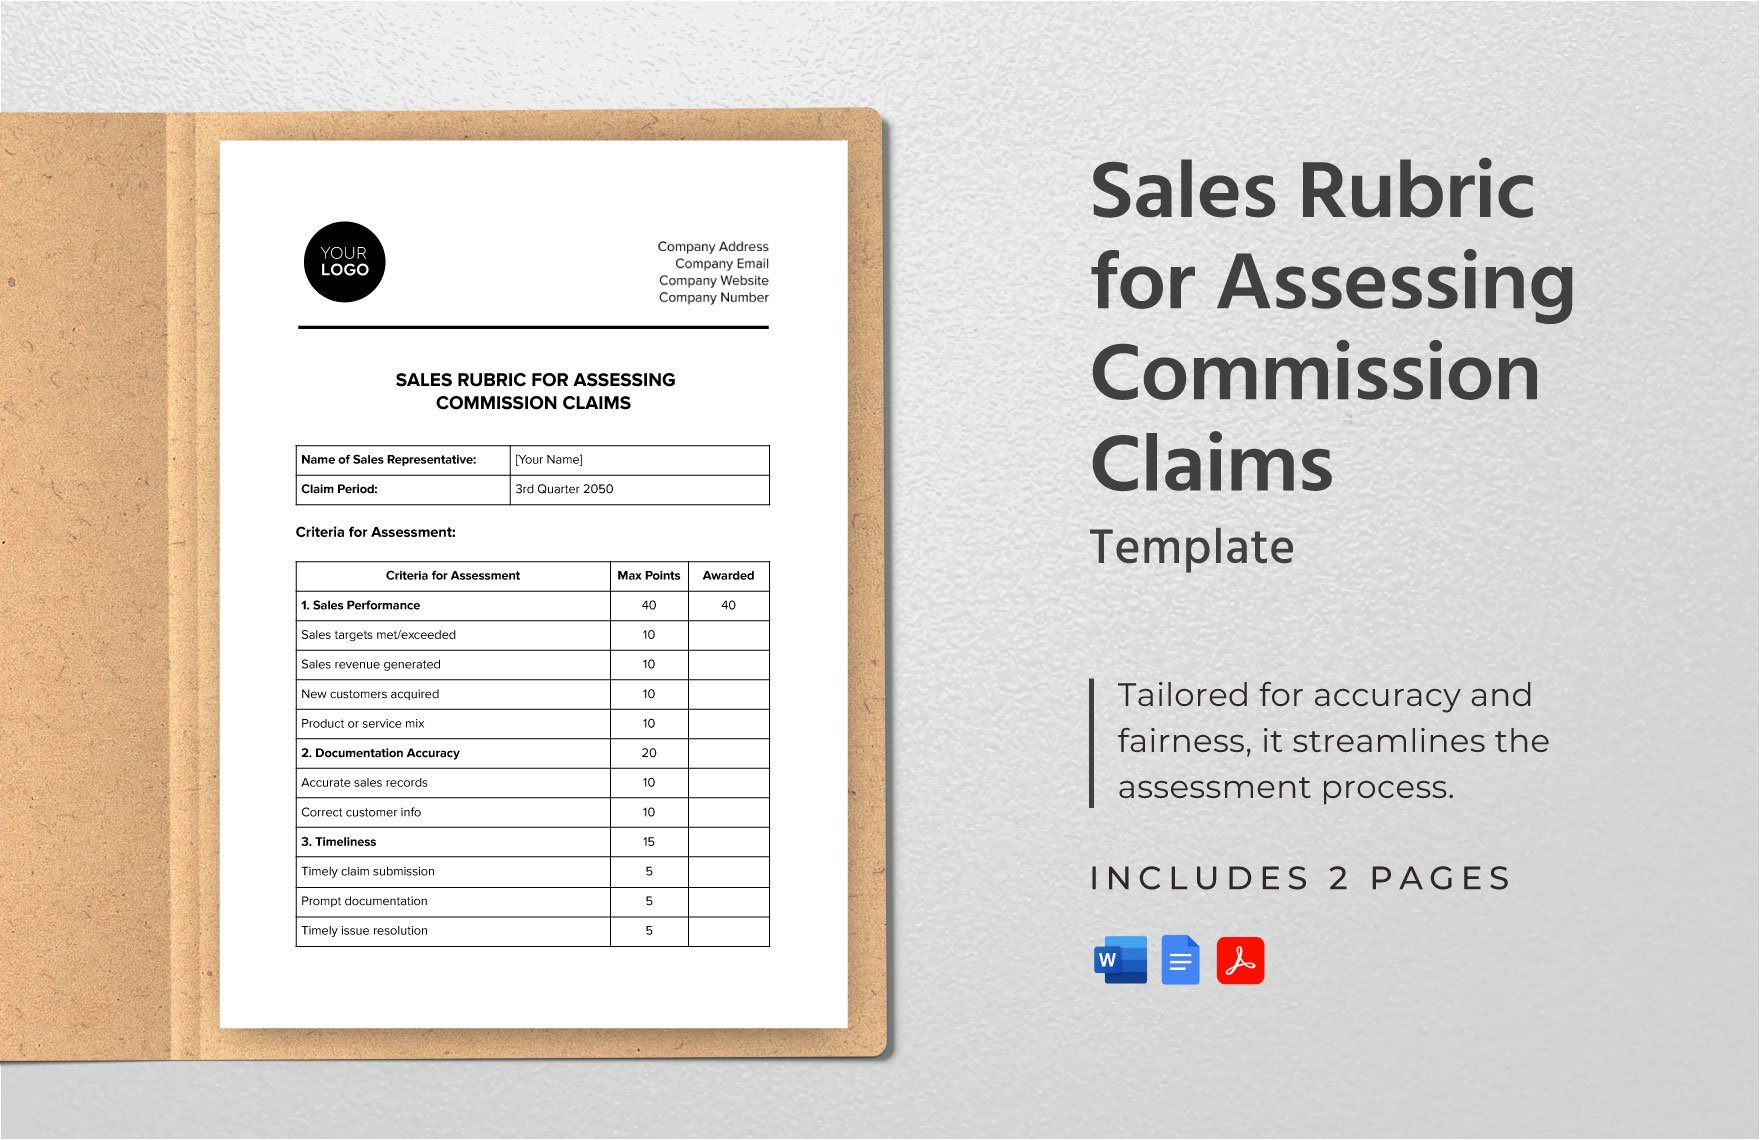 Sales Rubric for Assessing Commission Claims Template